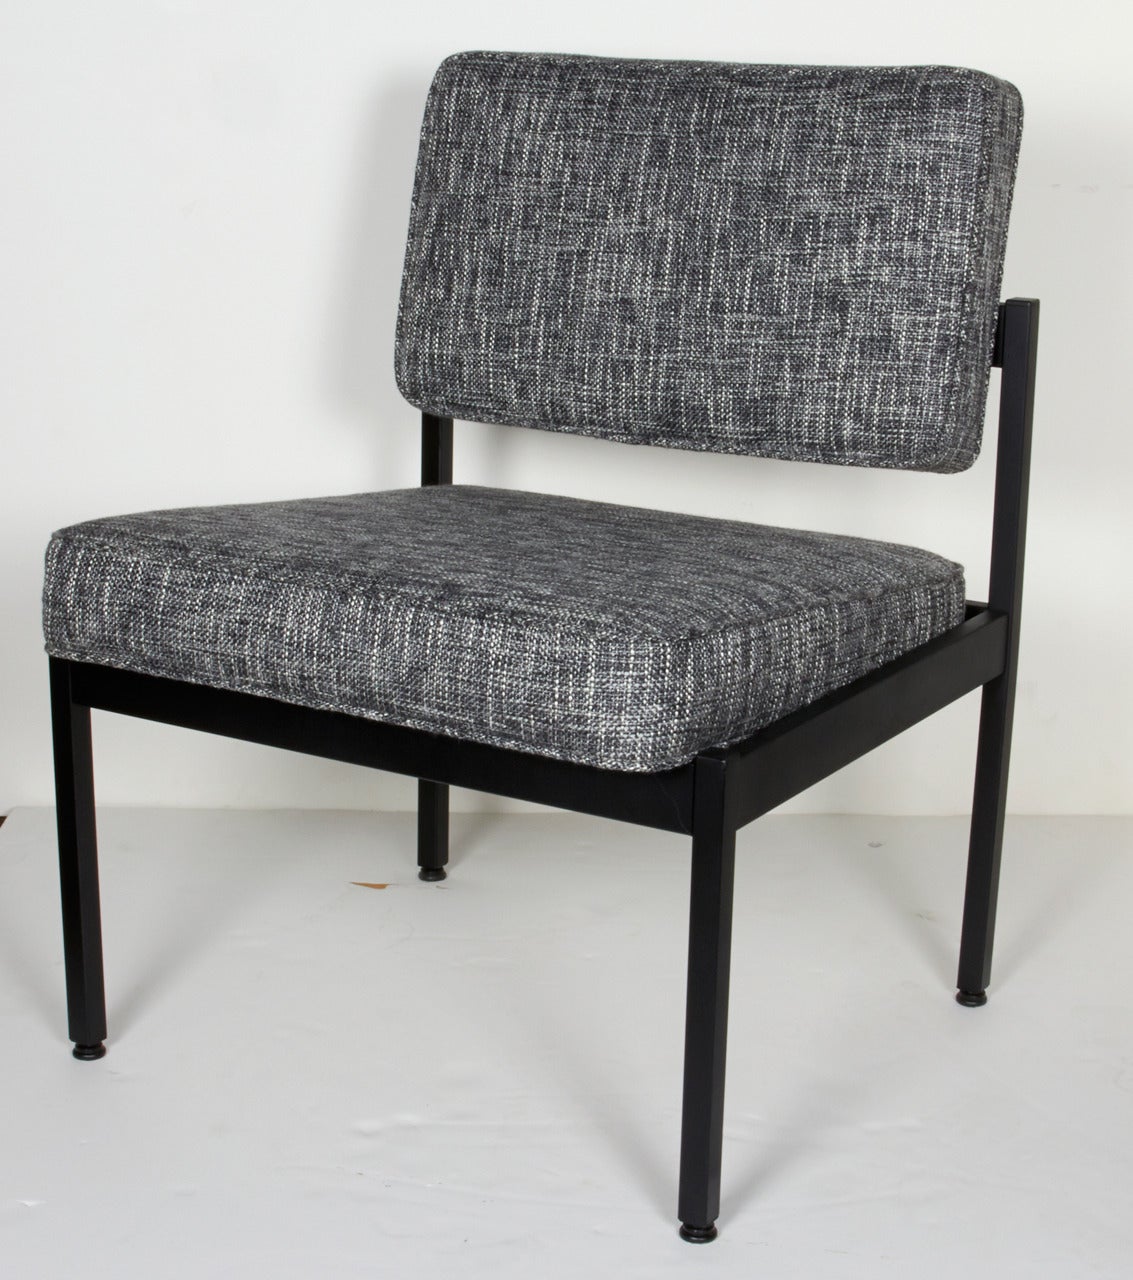 Late 20th Century Pair of Mid-Century Modern Easy Chairs in the Style of Florence Knoll